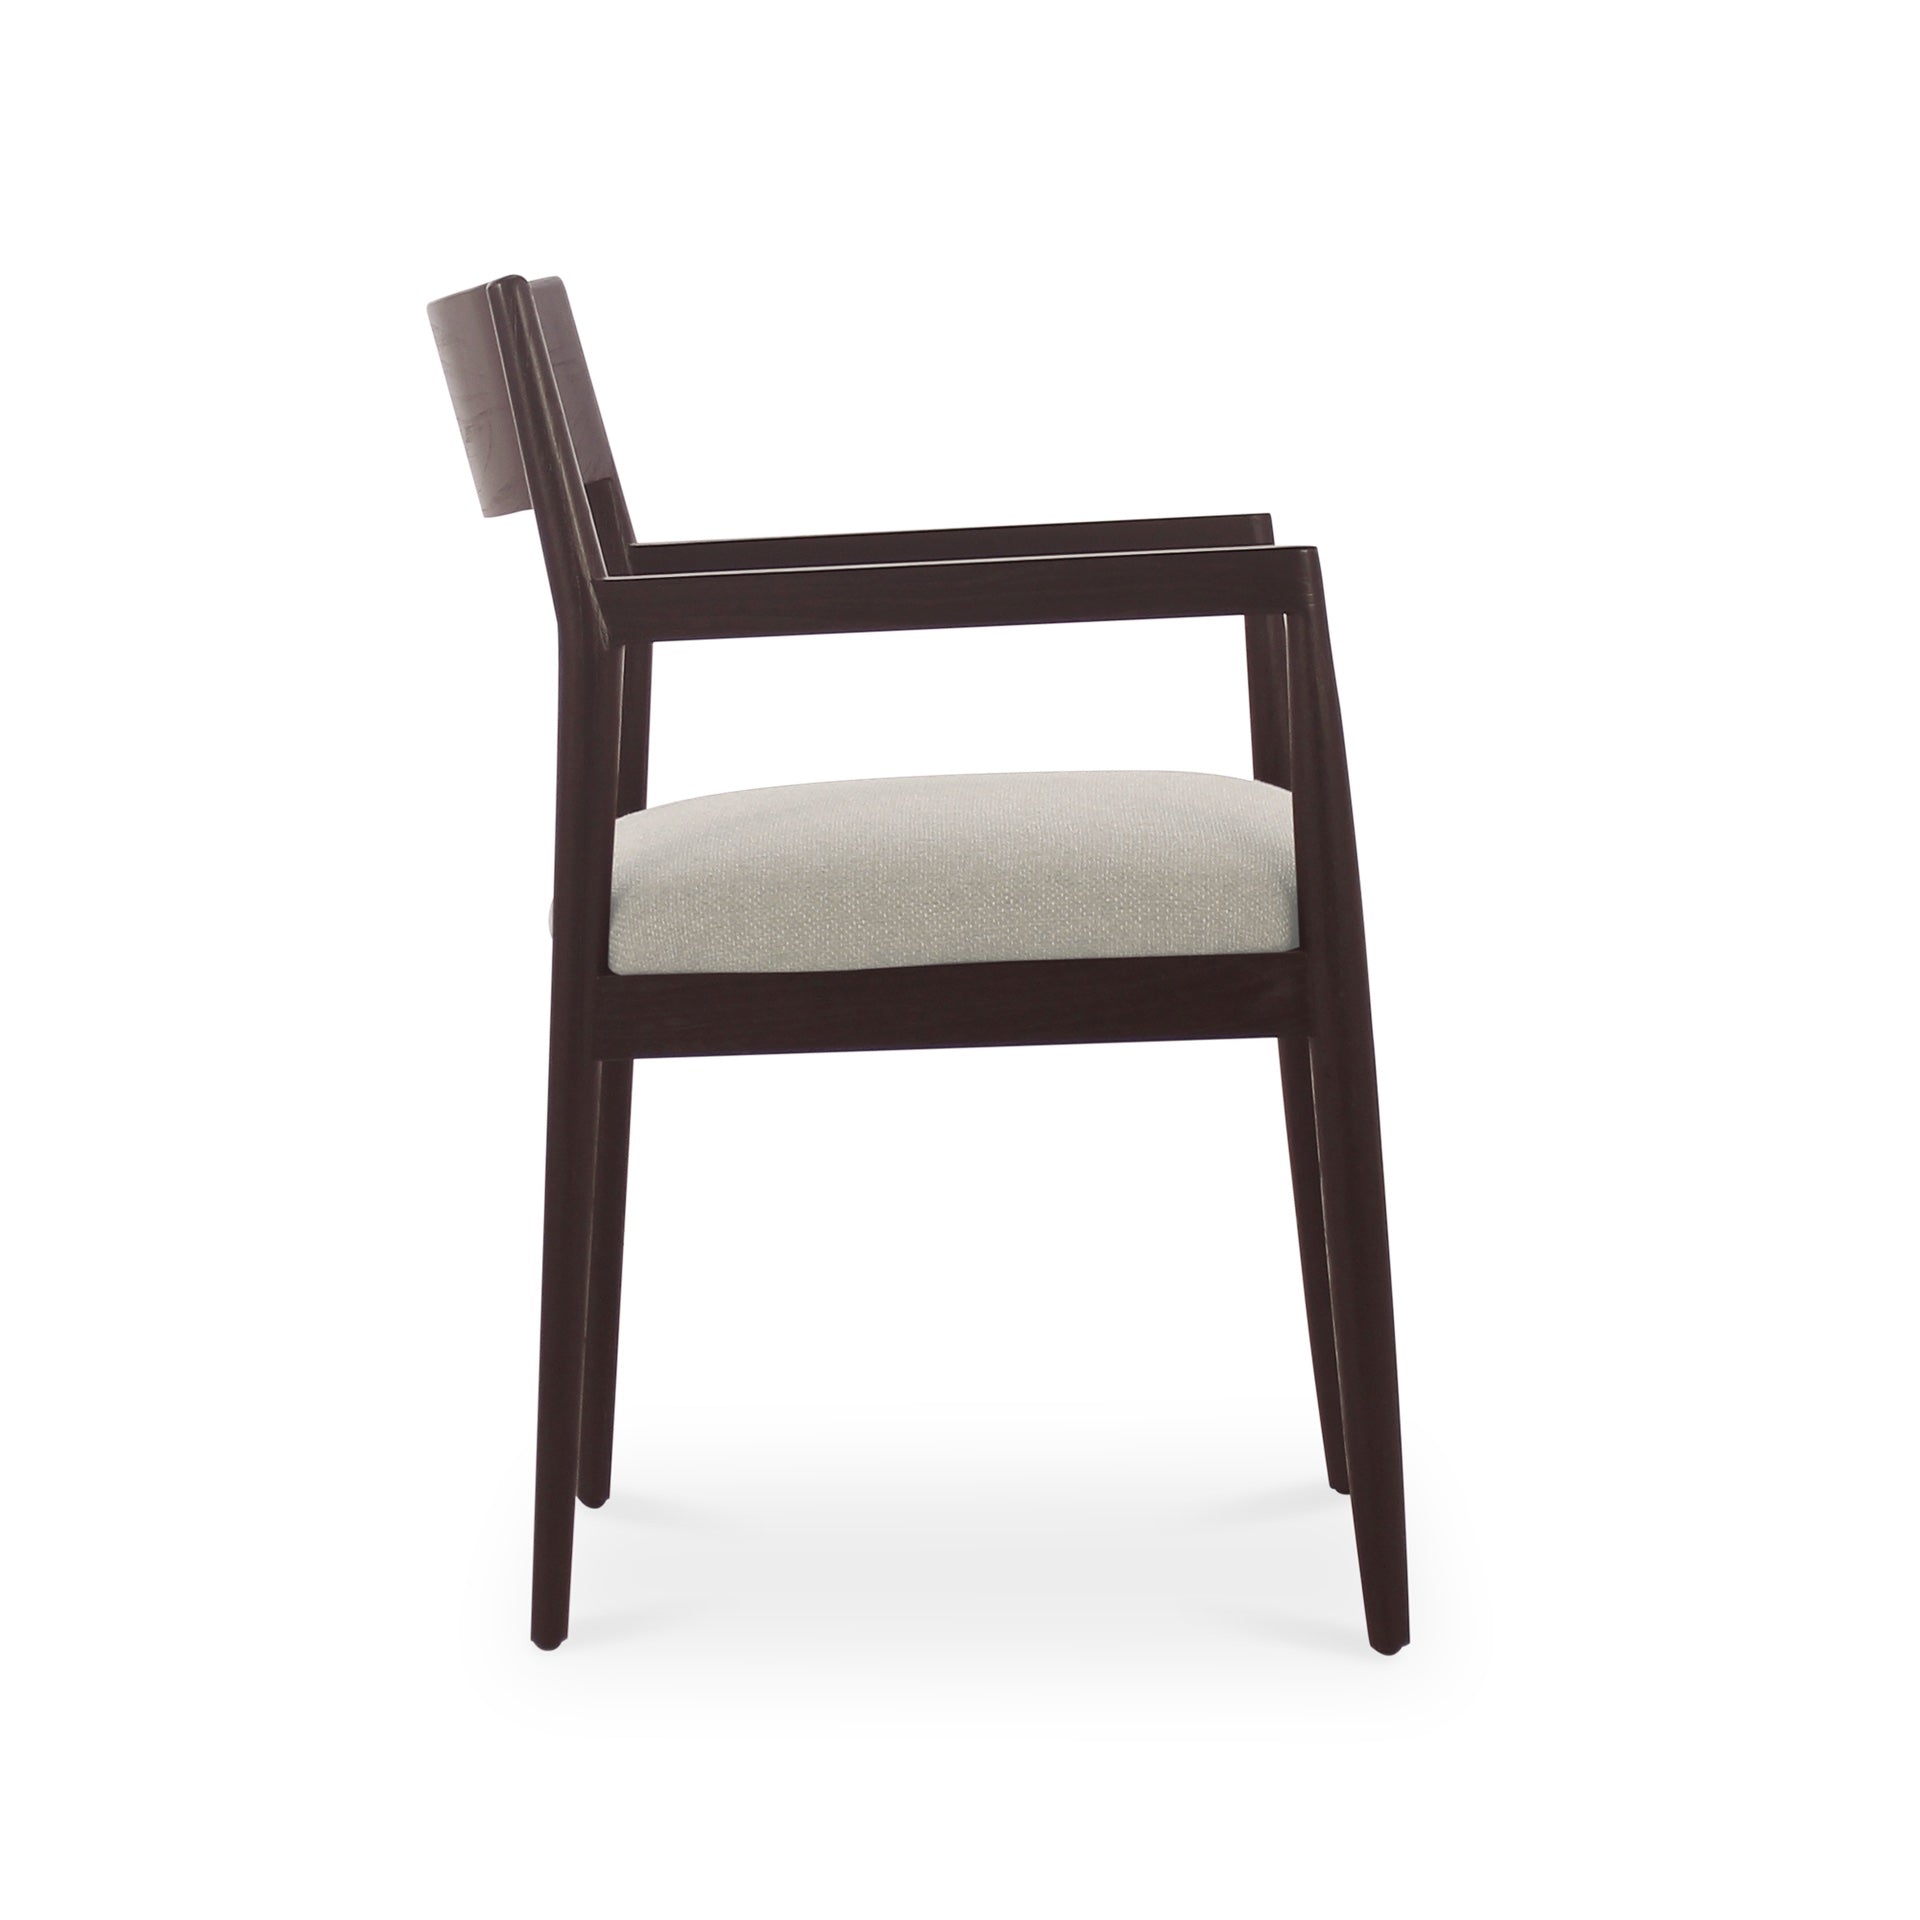 Lizzy Teak Dining Chair Walnut Finish in Monument Pearl White Fabric